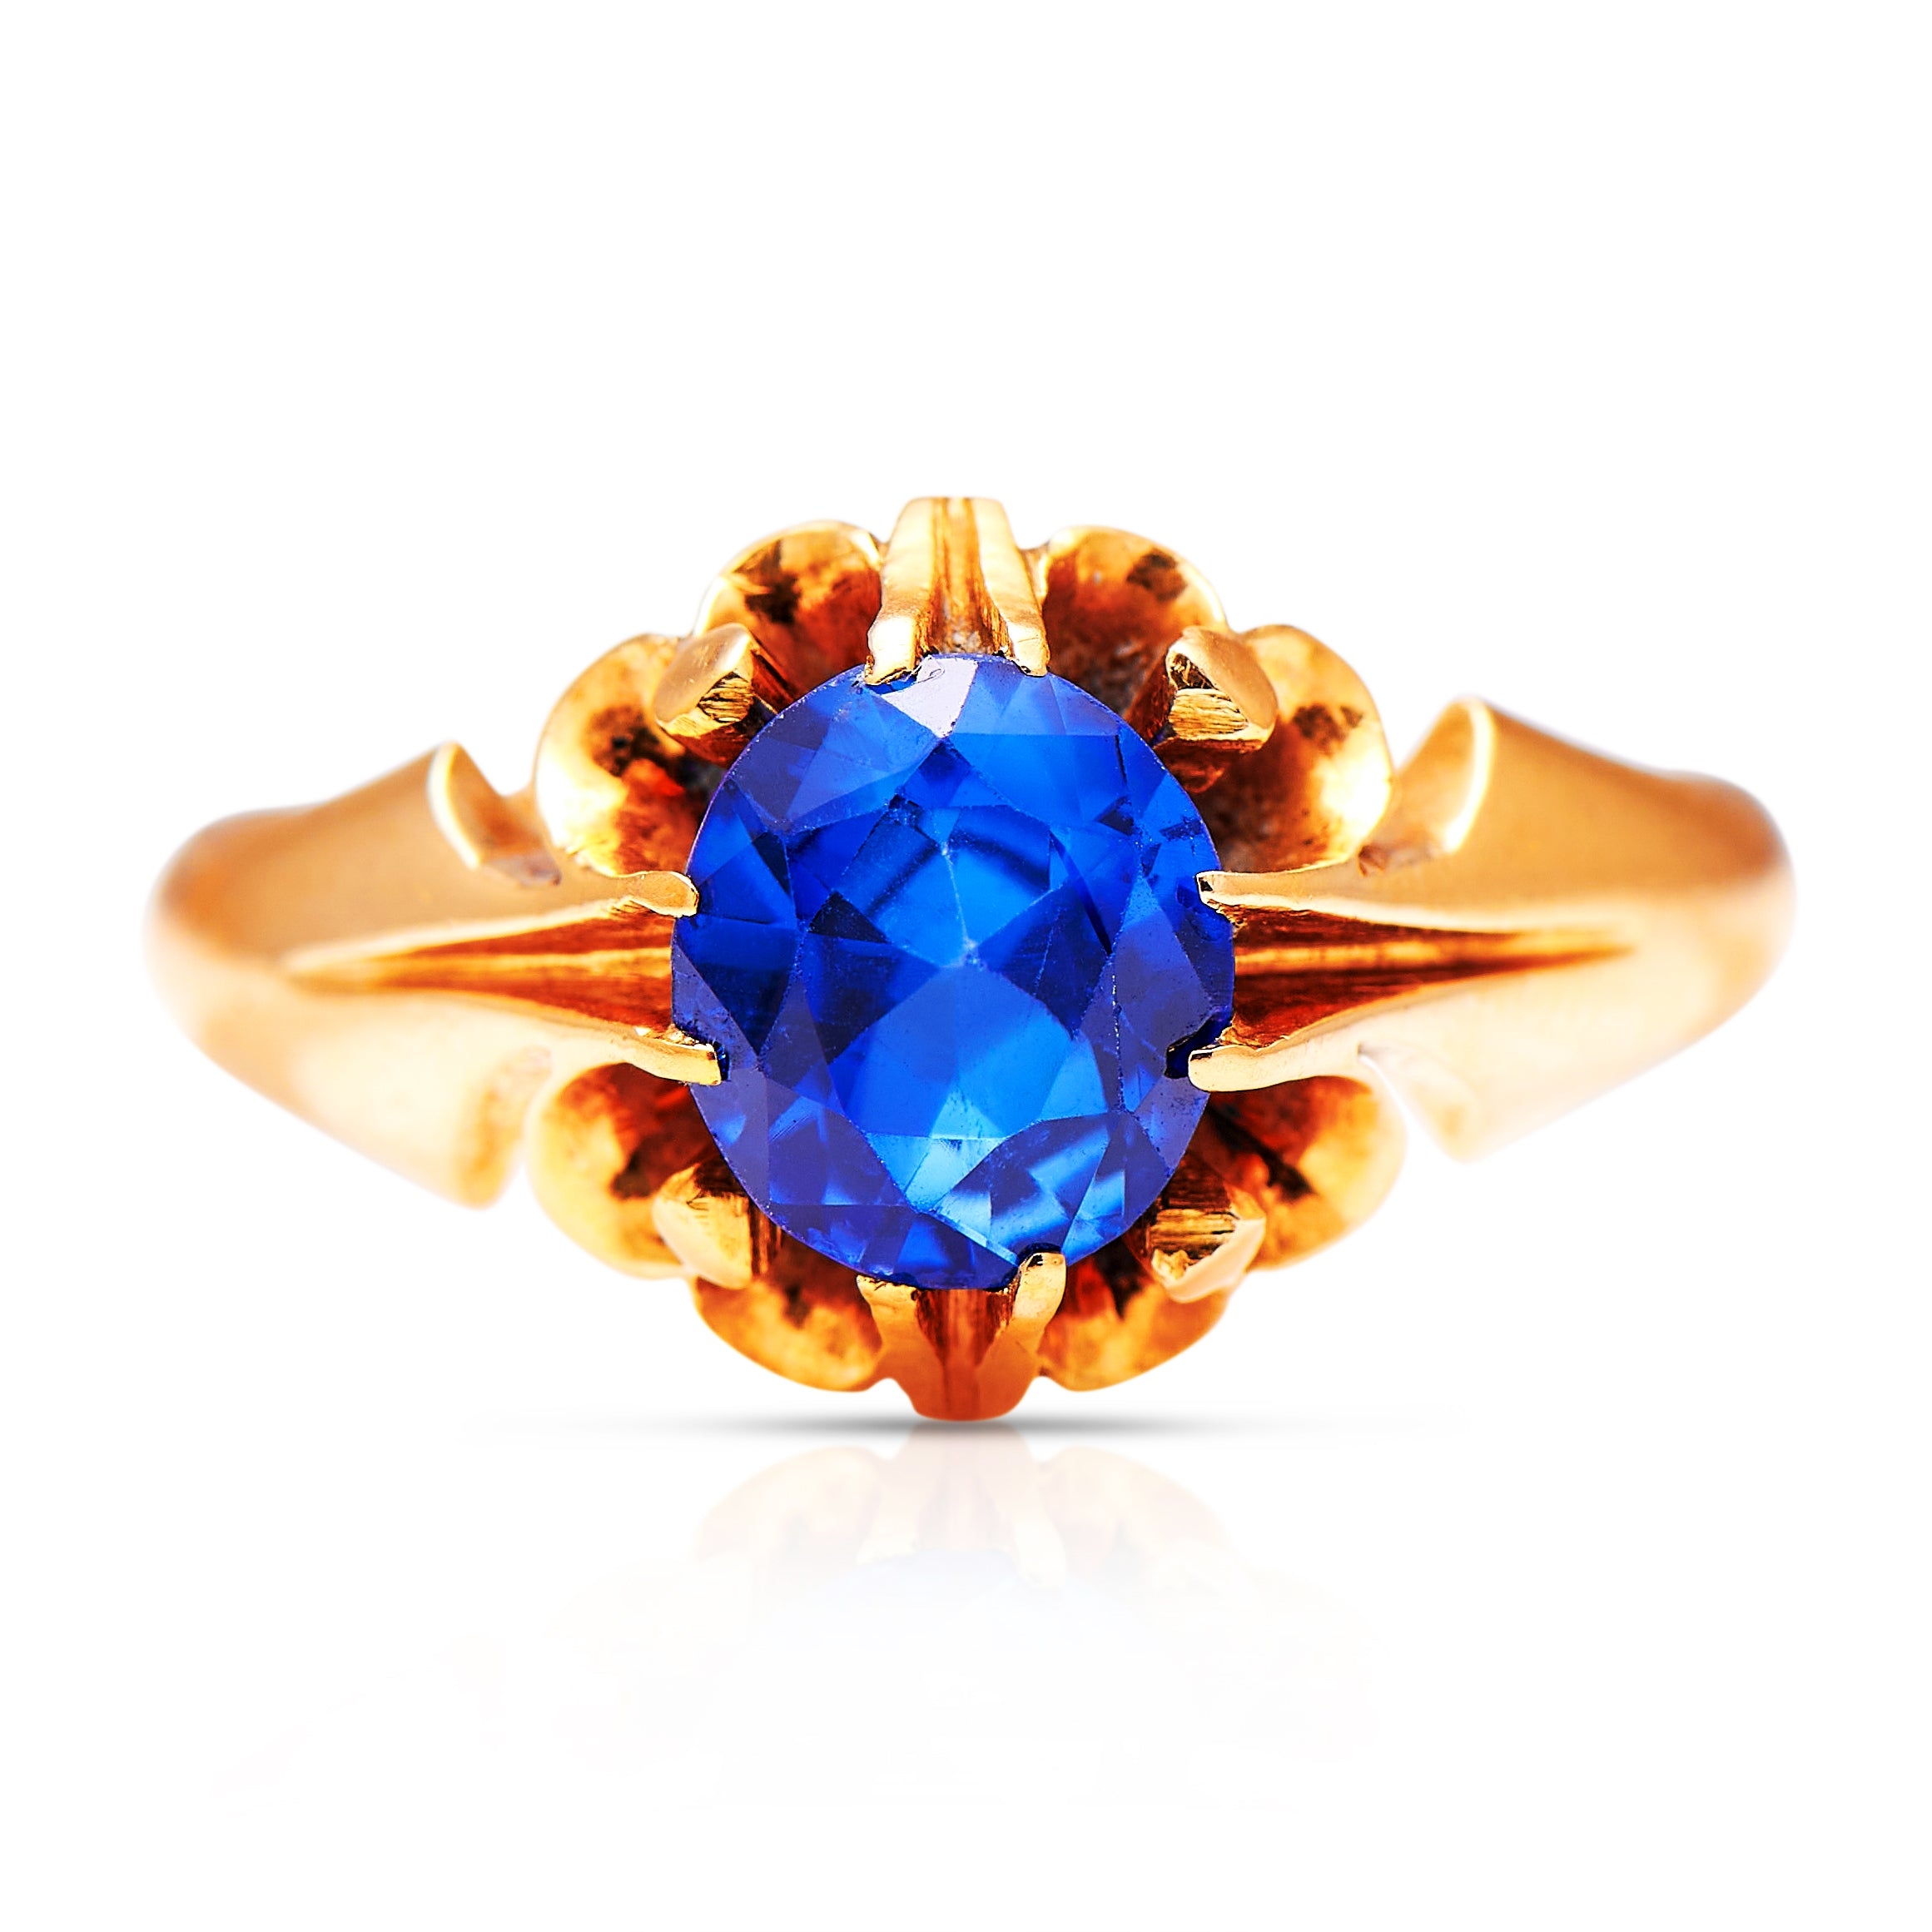 Engagement | Victorian, 18ct Gold Sapphire Ring – Vintage Ring – Antique Ring Boutique